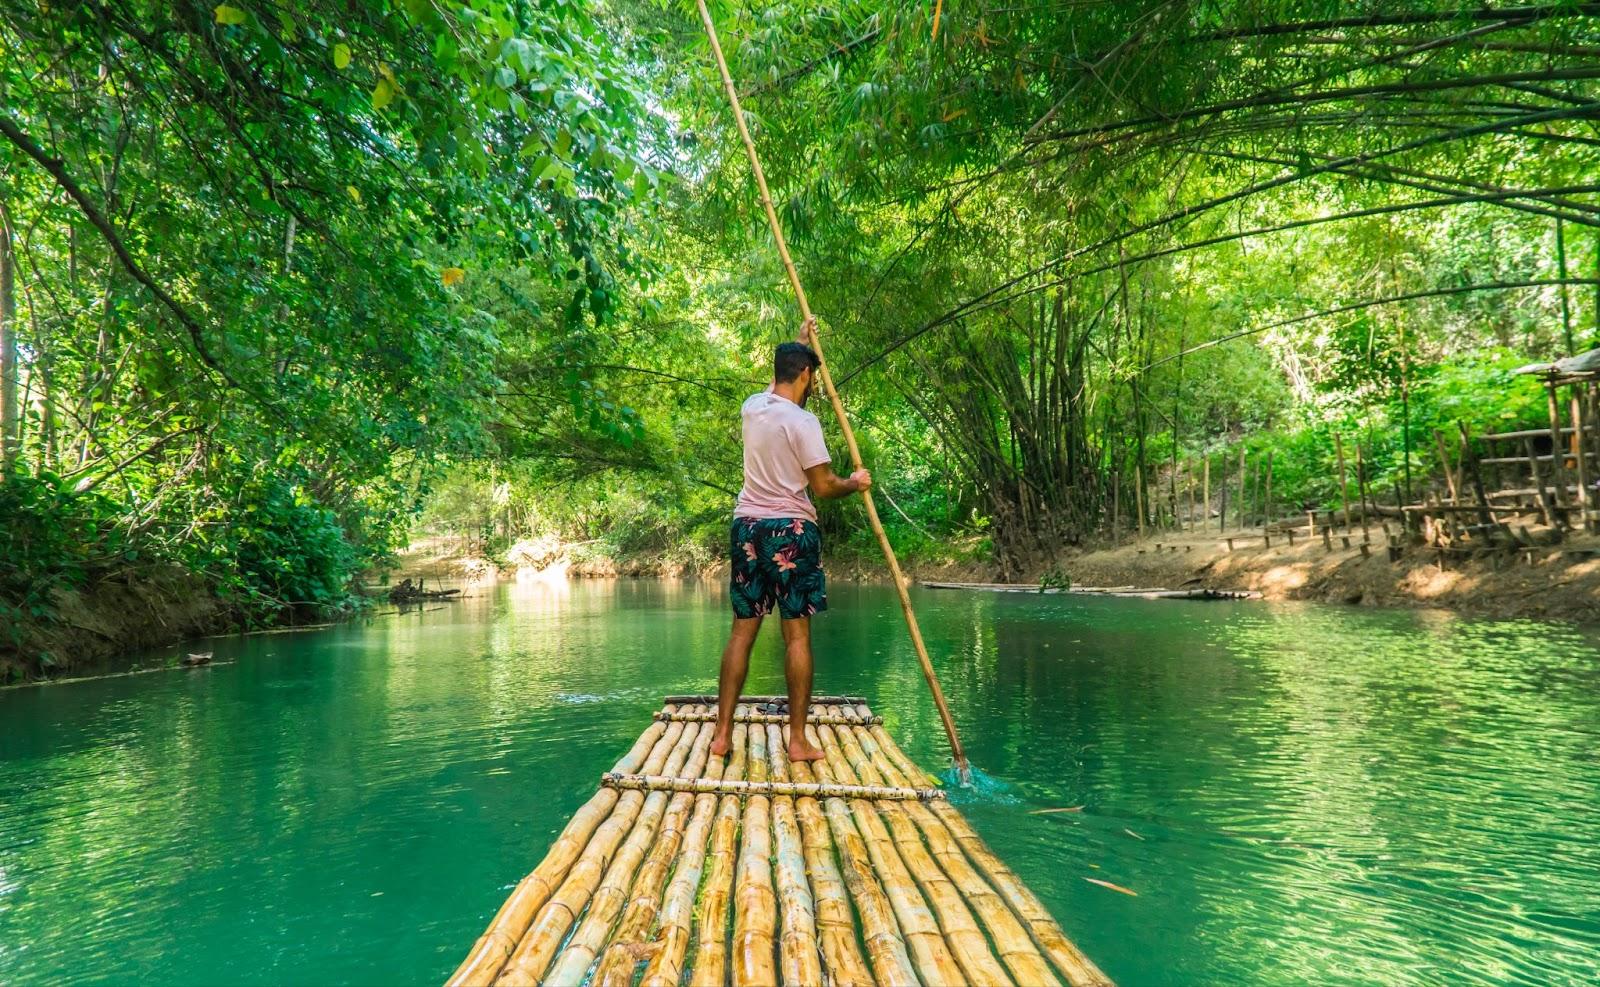 Landscape shot of man (tourist) rowing bamboo raft, whilst on cruise on vacation in Montego Bay, Jamaica, Caribbean.